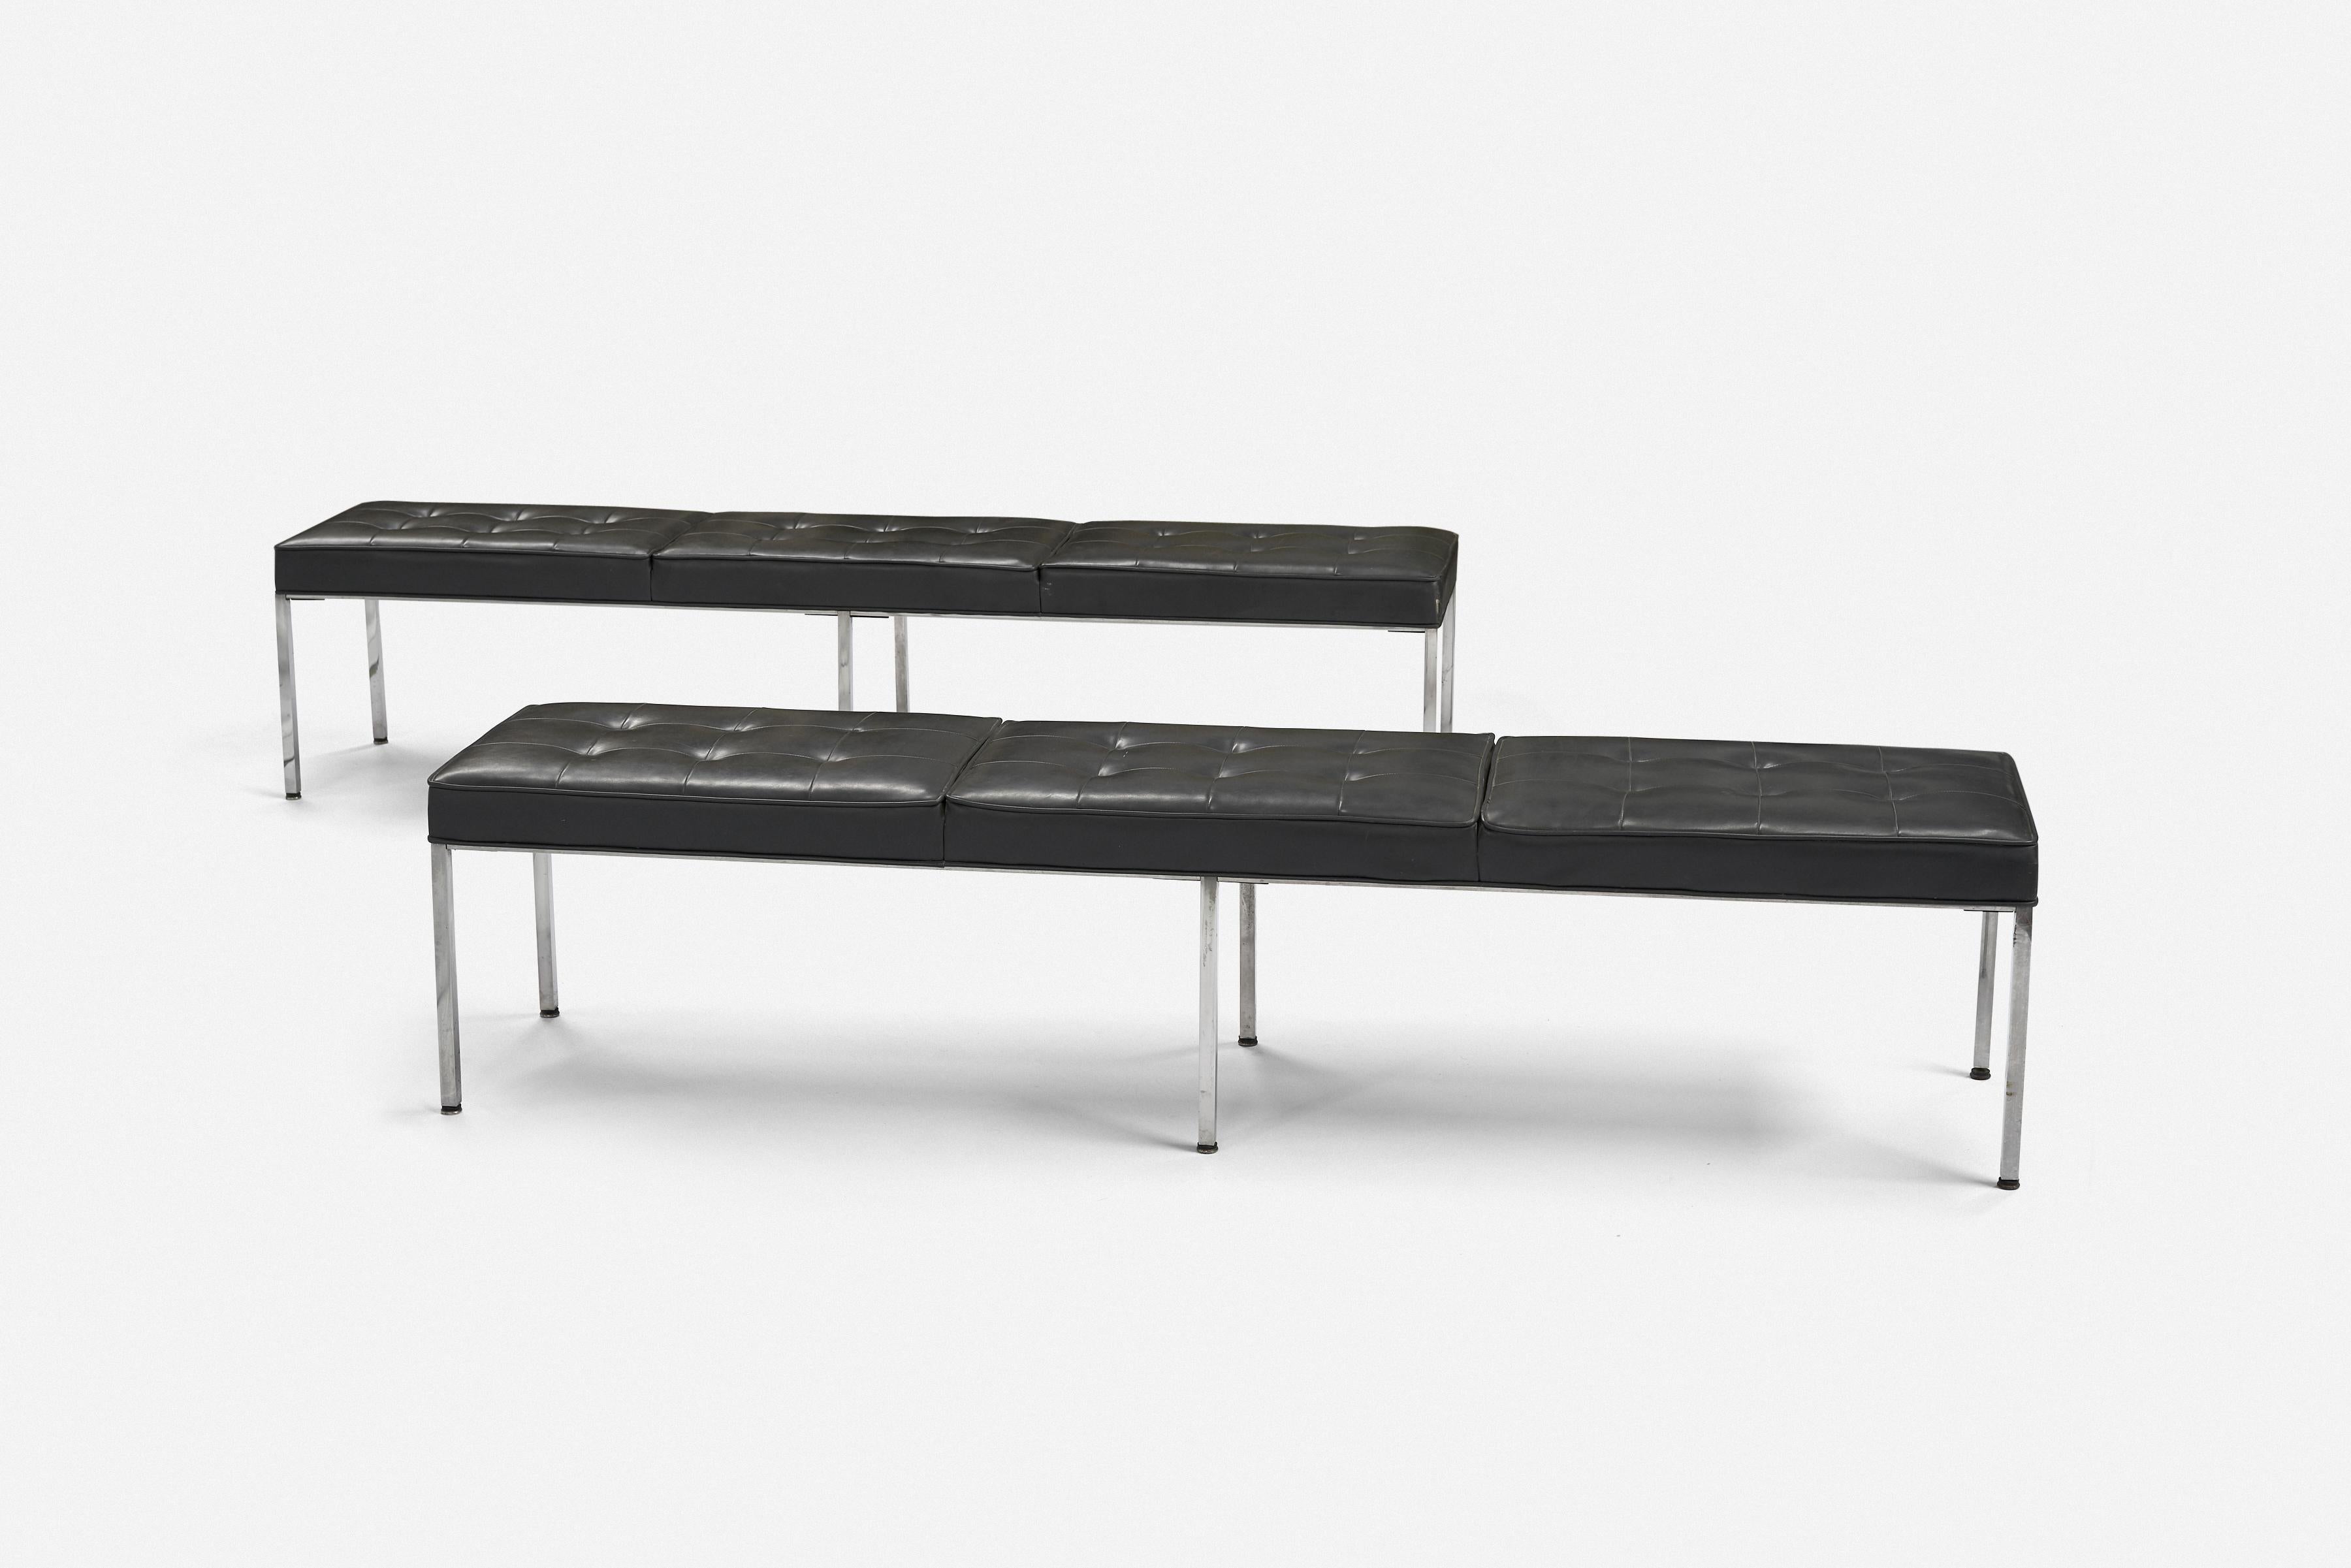 Pair of Mid-Century Modern Thonet bench

Dark grey vinyl top with steel base

Measures: 80” L x 18” D x 18.5” H

Original condition, oxidation to steel, small tears to vinyl, tears to underneath dust cover. Small burn mark to 1 bench.